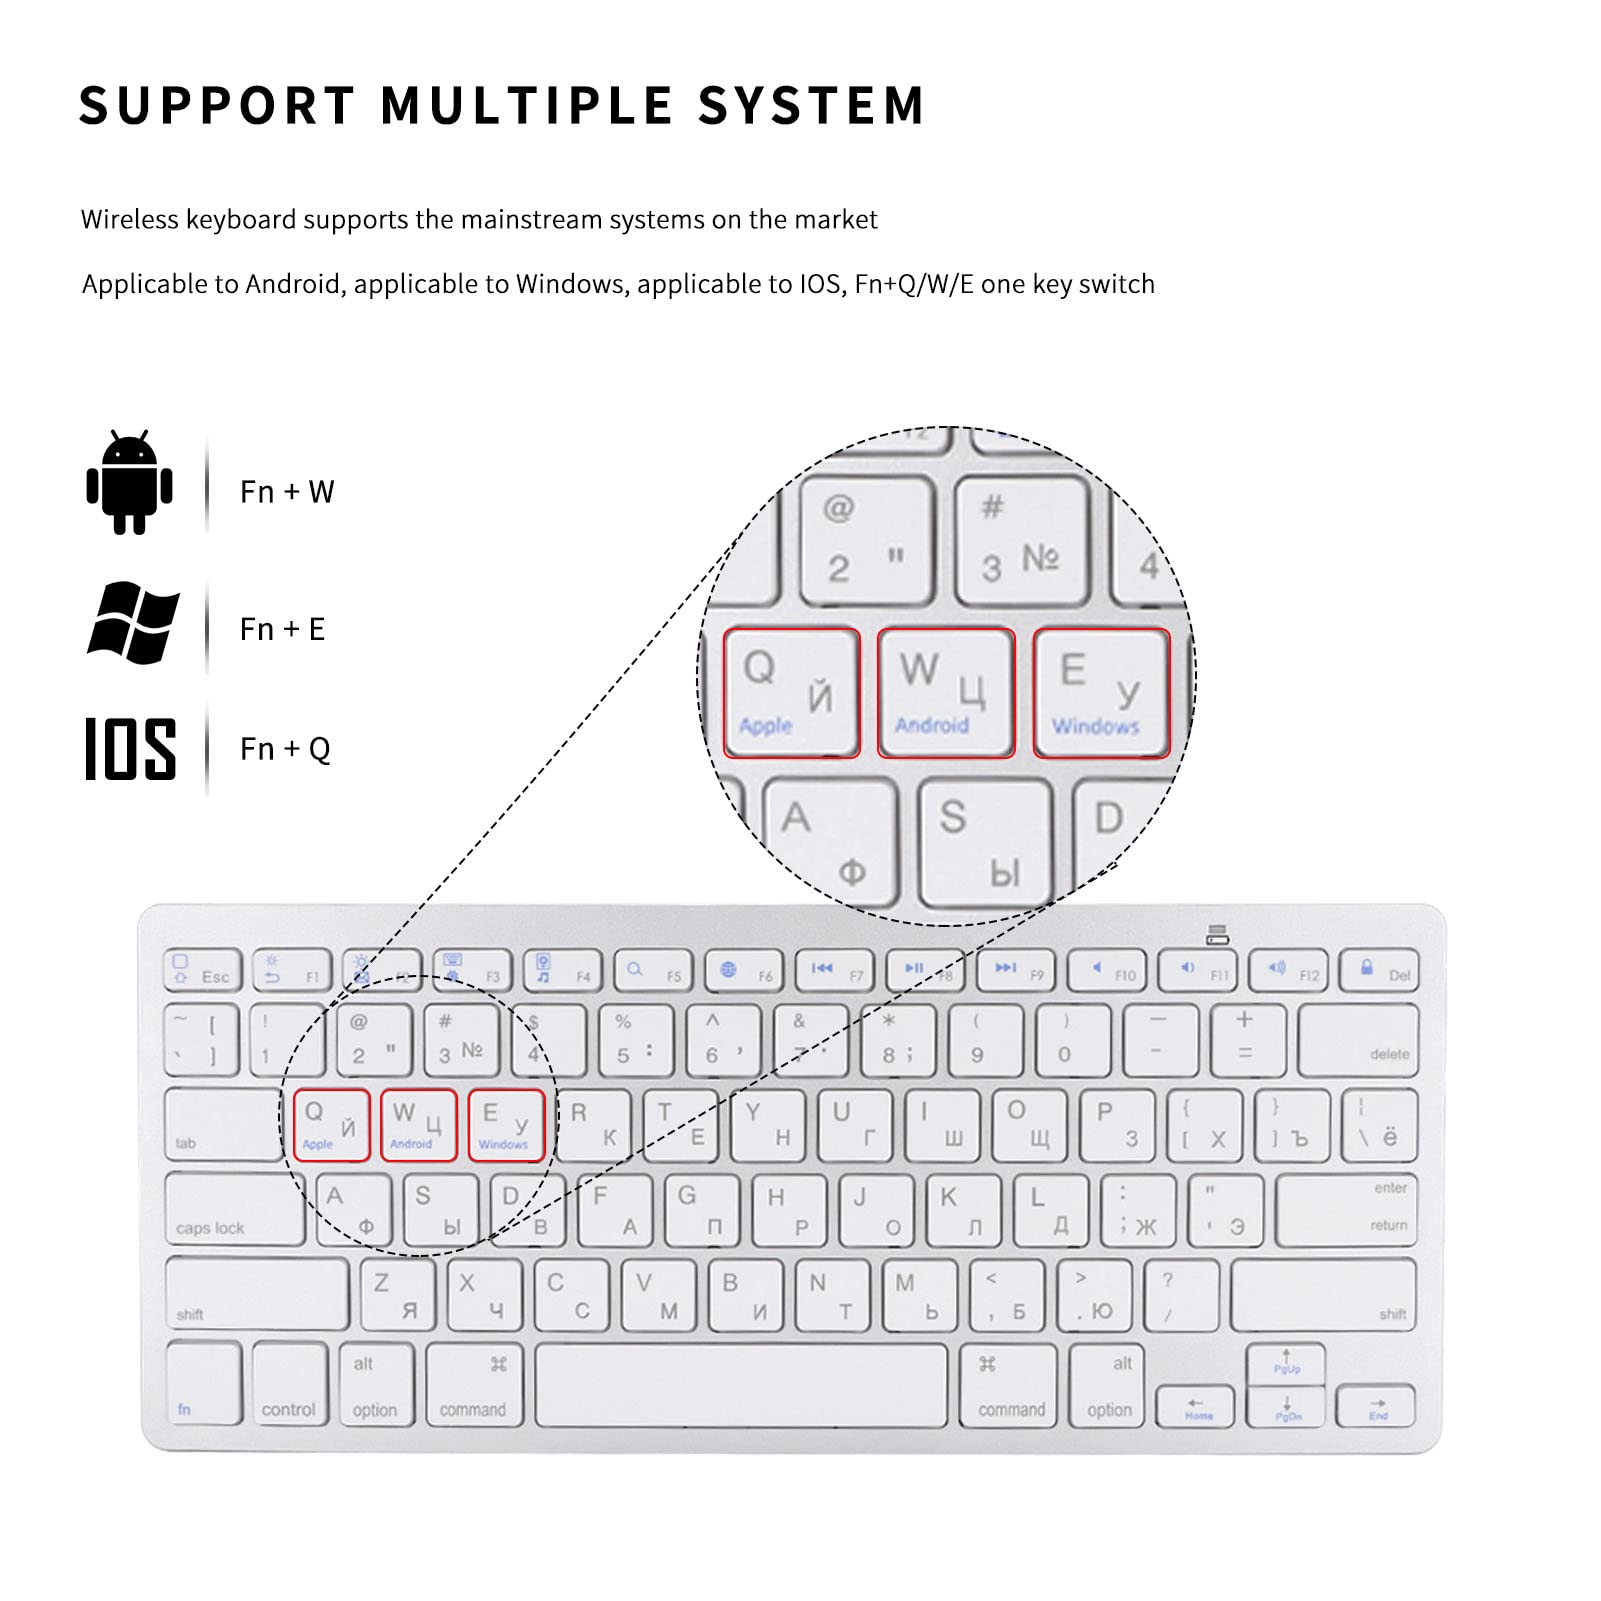 Russian Wireless BT Keyboard,Multi-Functional Ultra-Thin Professional Brightness Adjustment Keyboard,for iOS Mobile Phone/for Windows/for Android